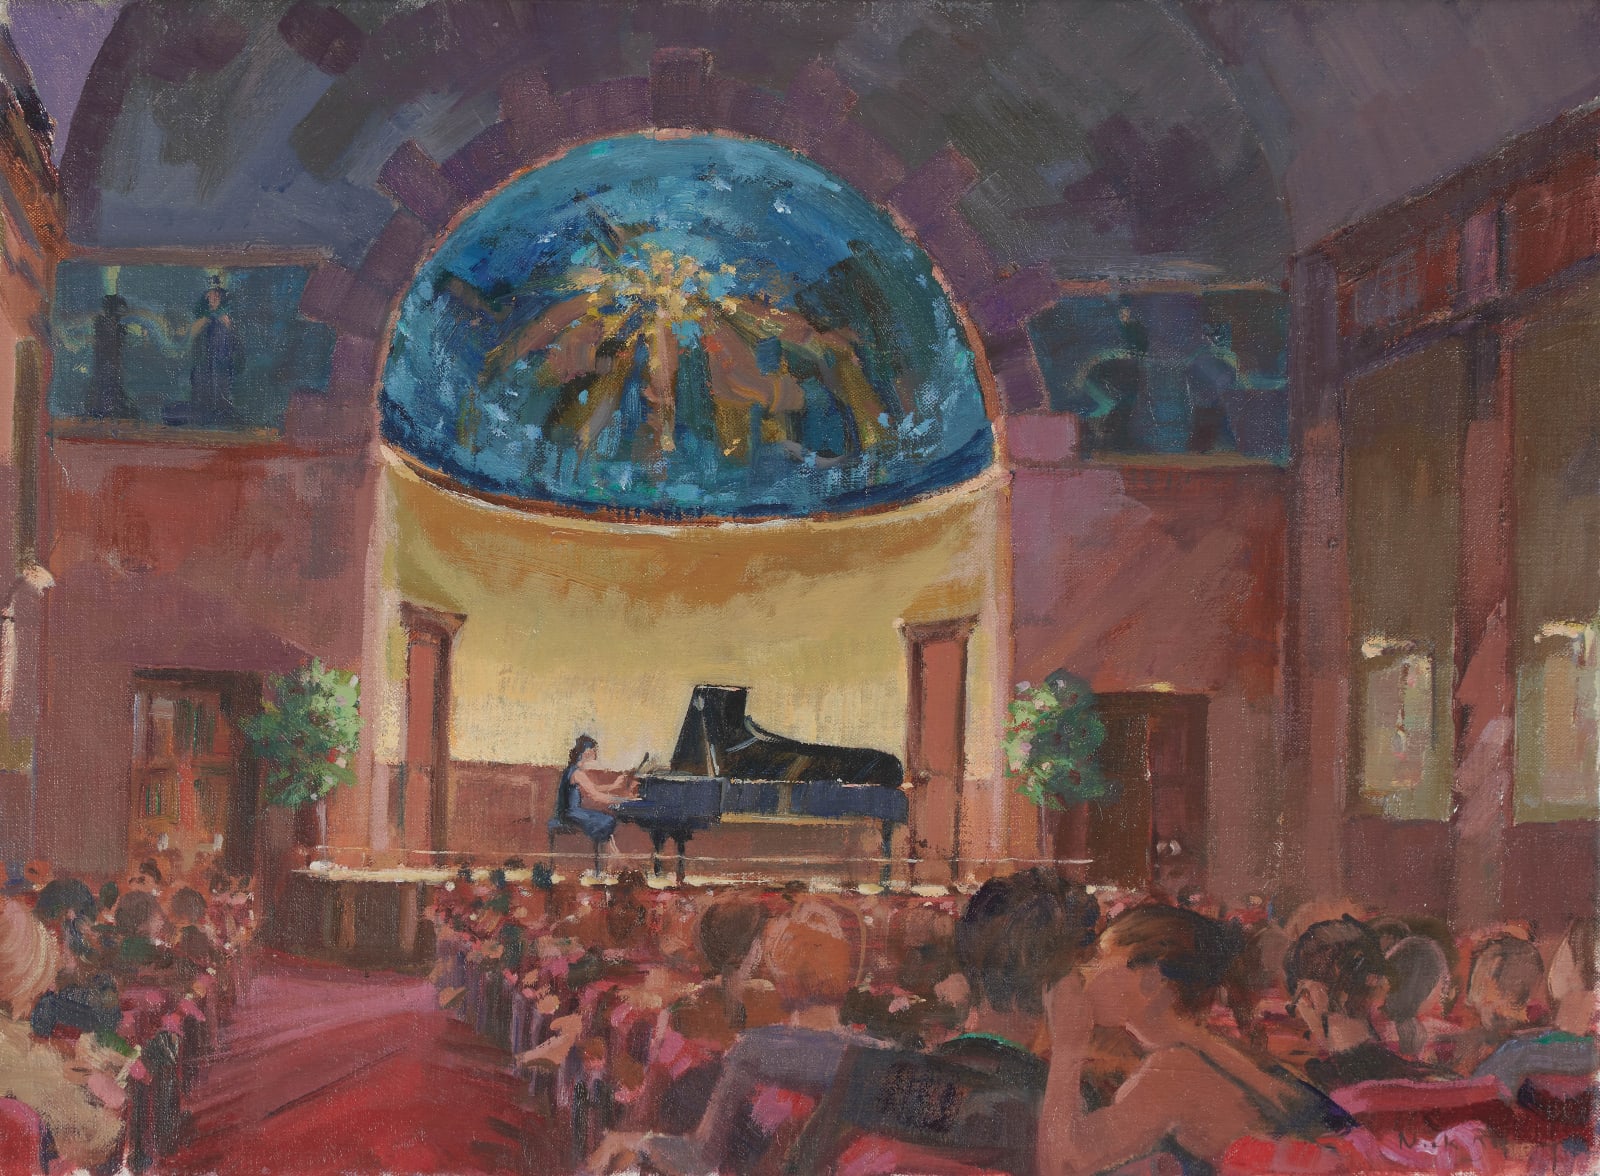 Nick Botting, The Pianist, Wigmore Hall, 2022